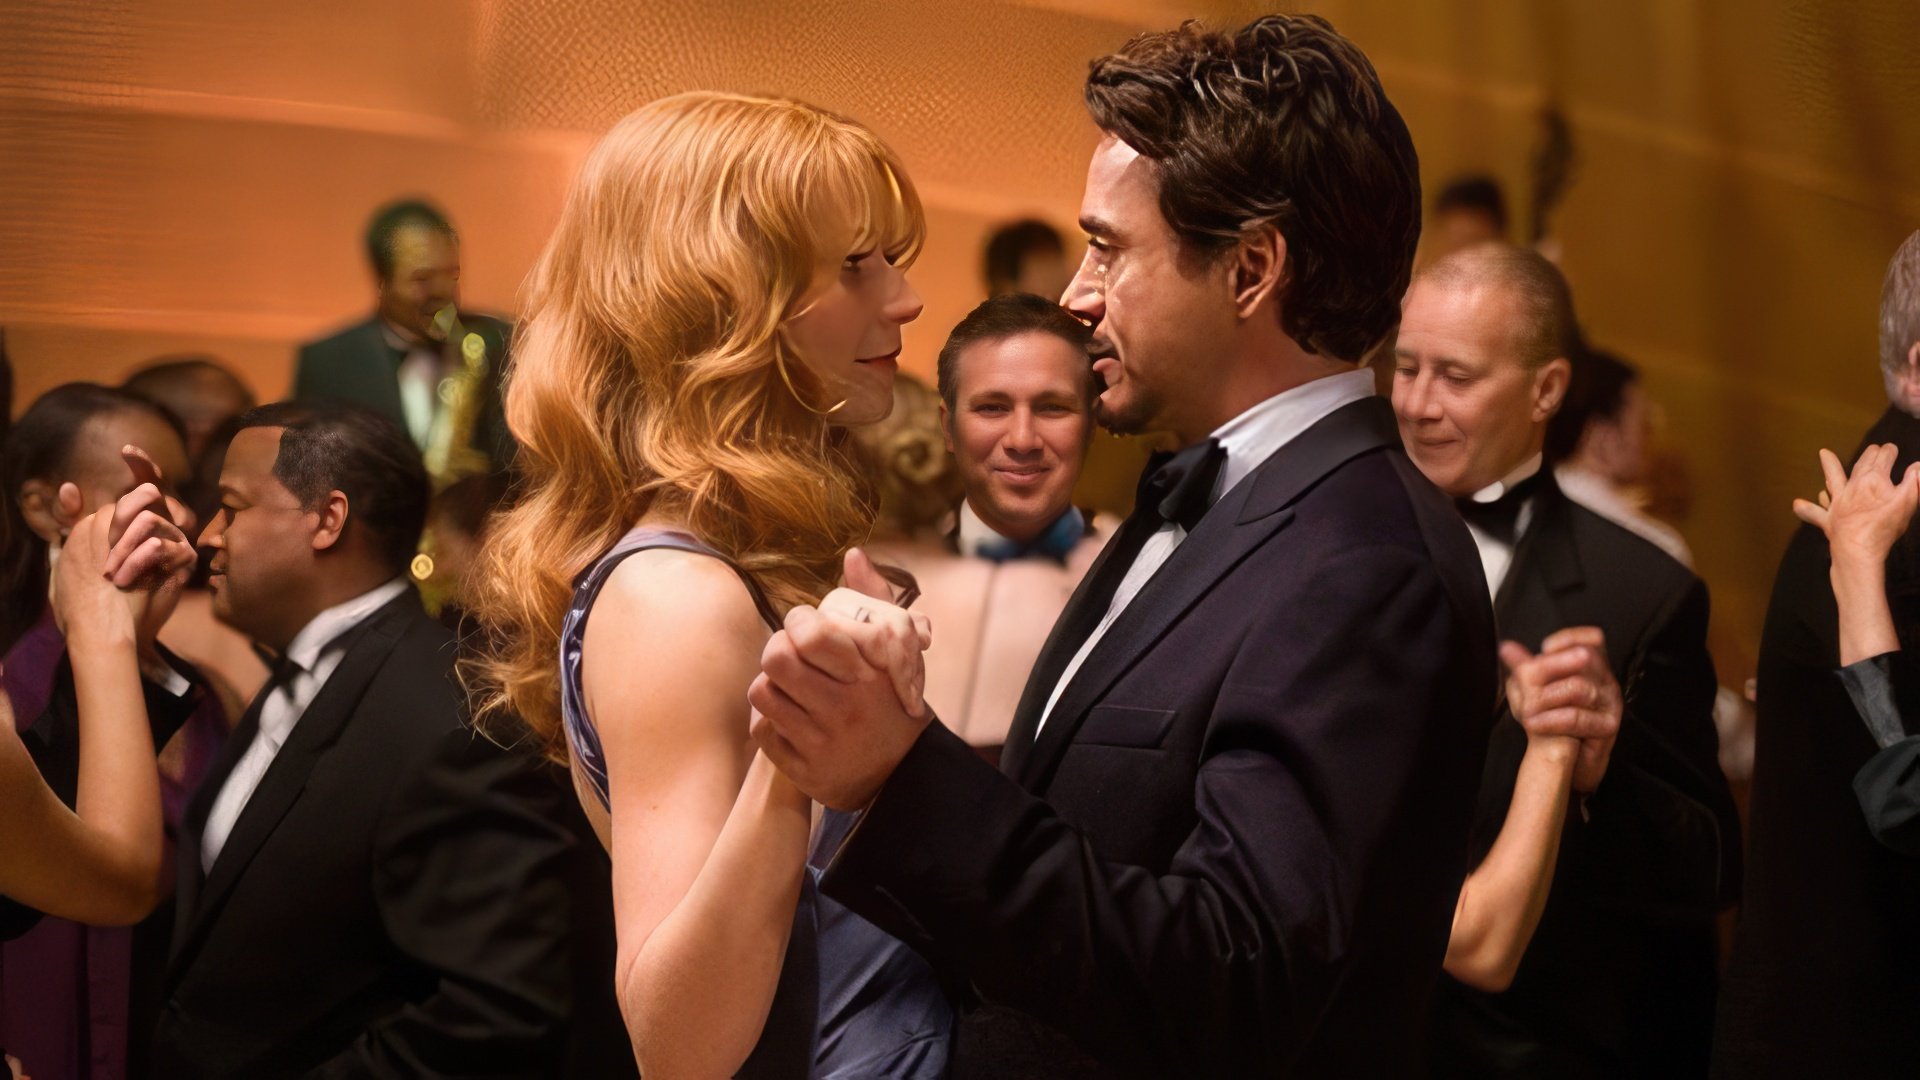 Gwyneth Paltrow and Robert Downey Jr. in the movie Iron Man